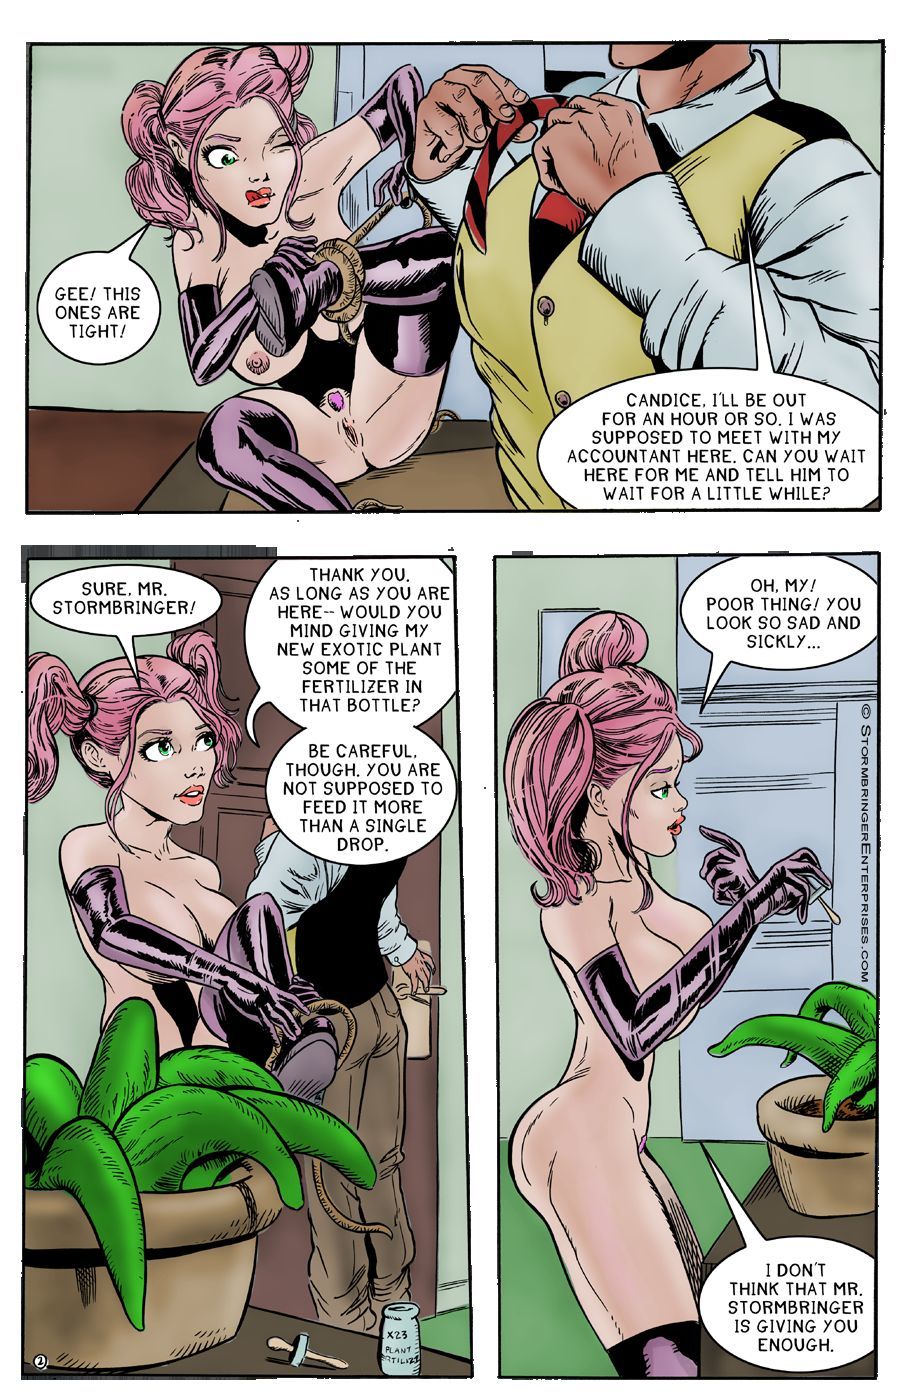 Planted! Erotic Adventures of Candice page 2